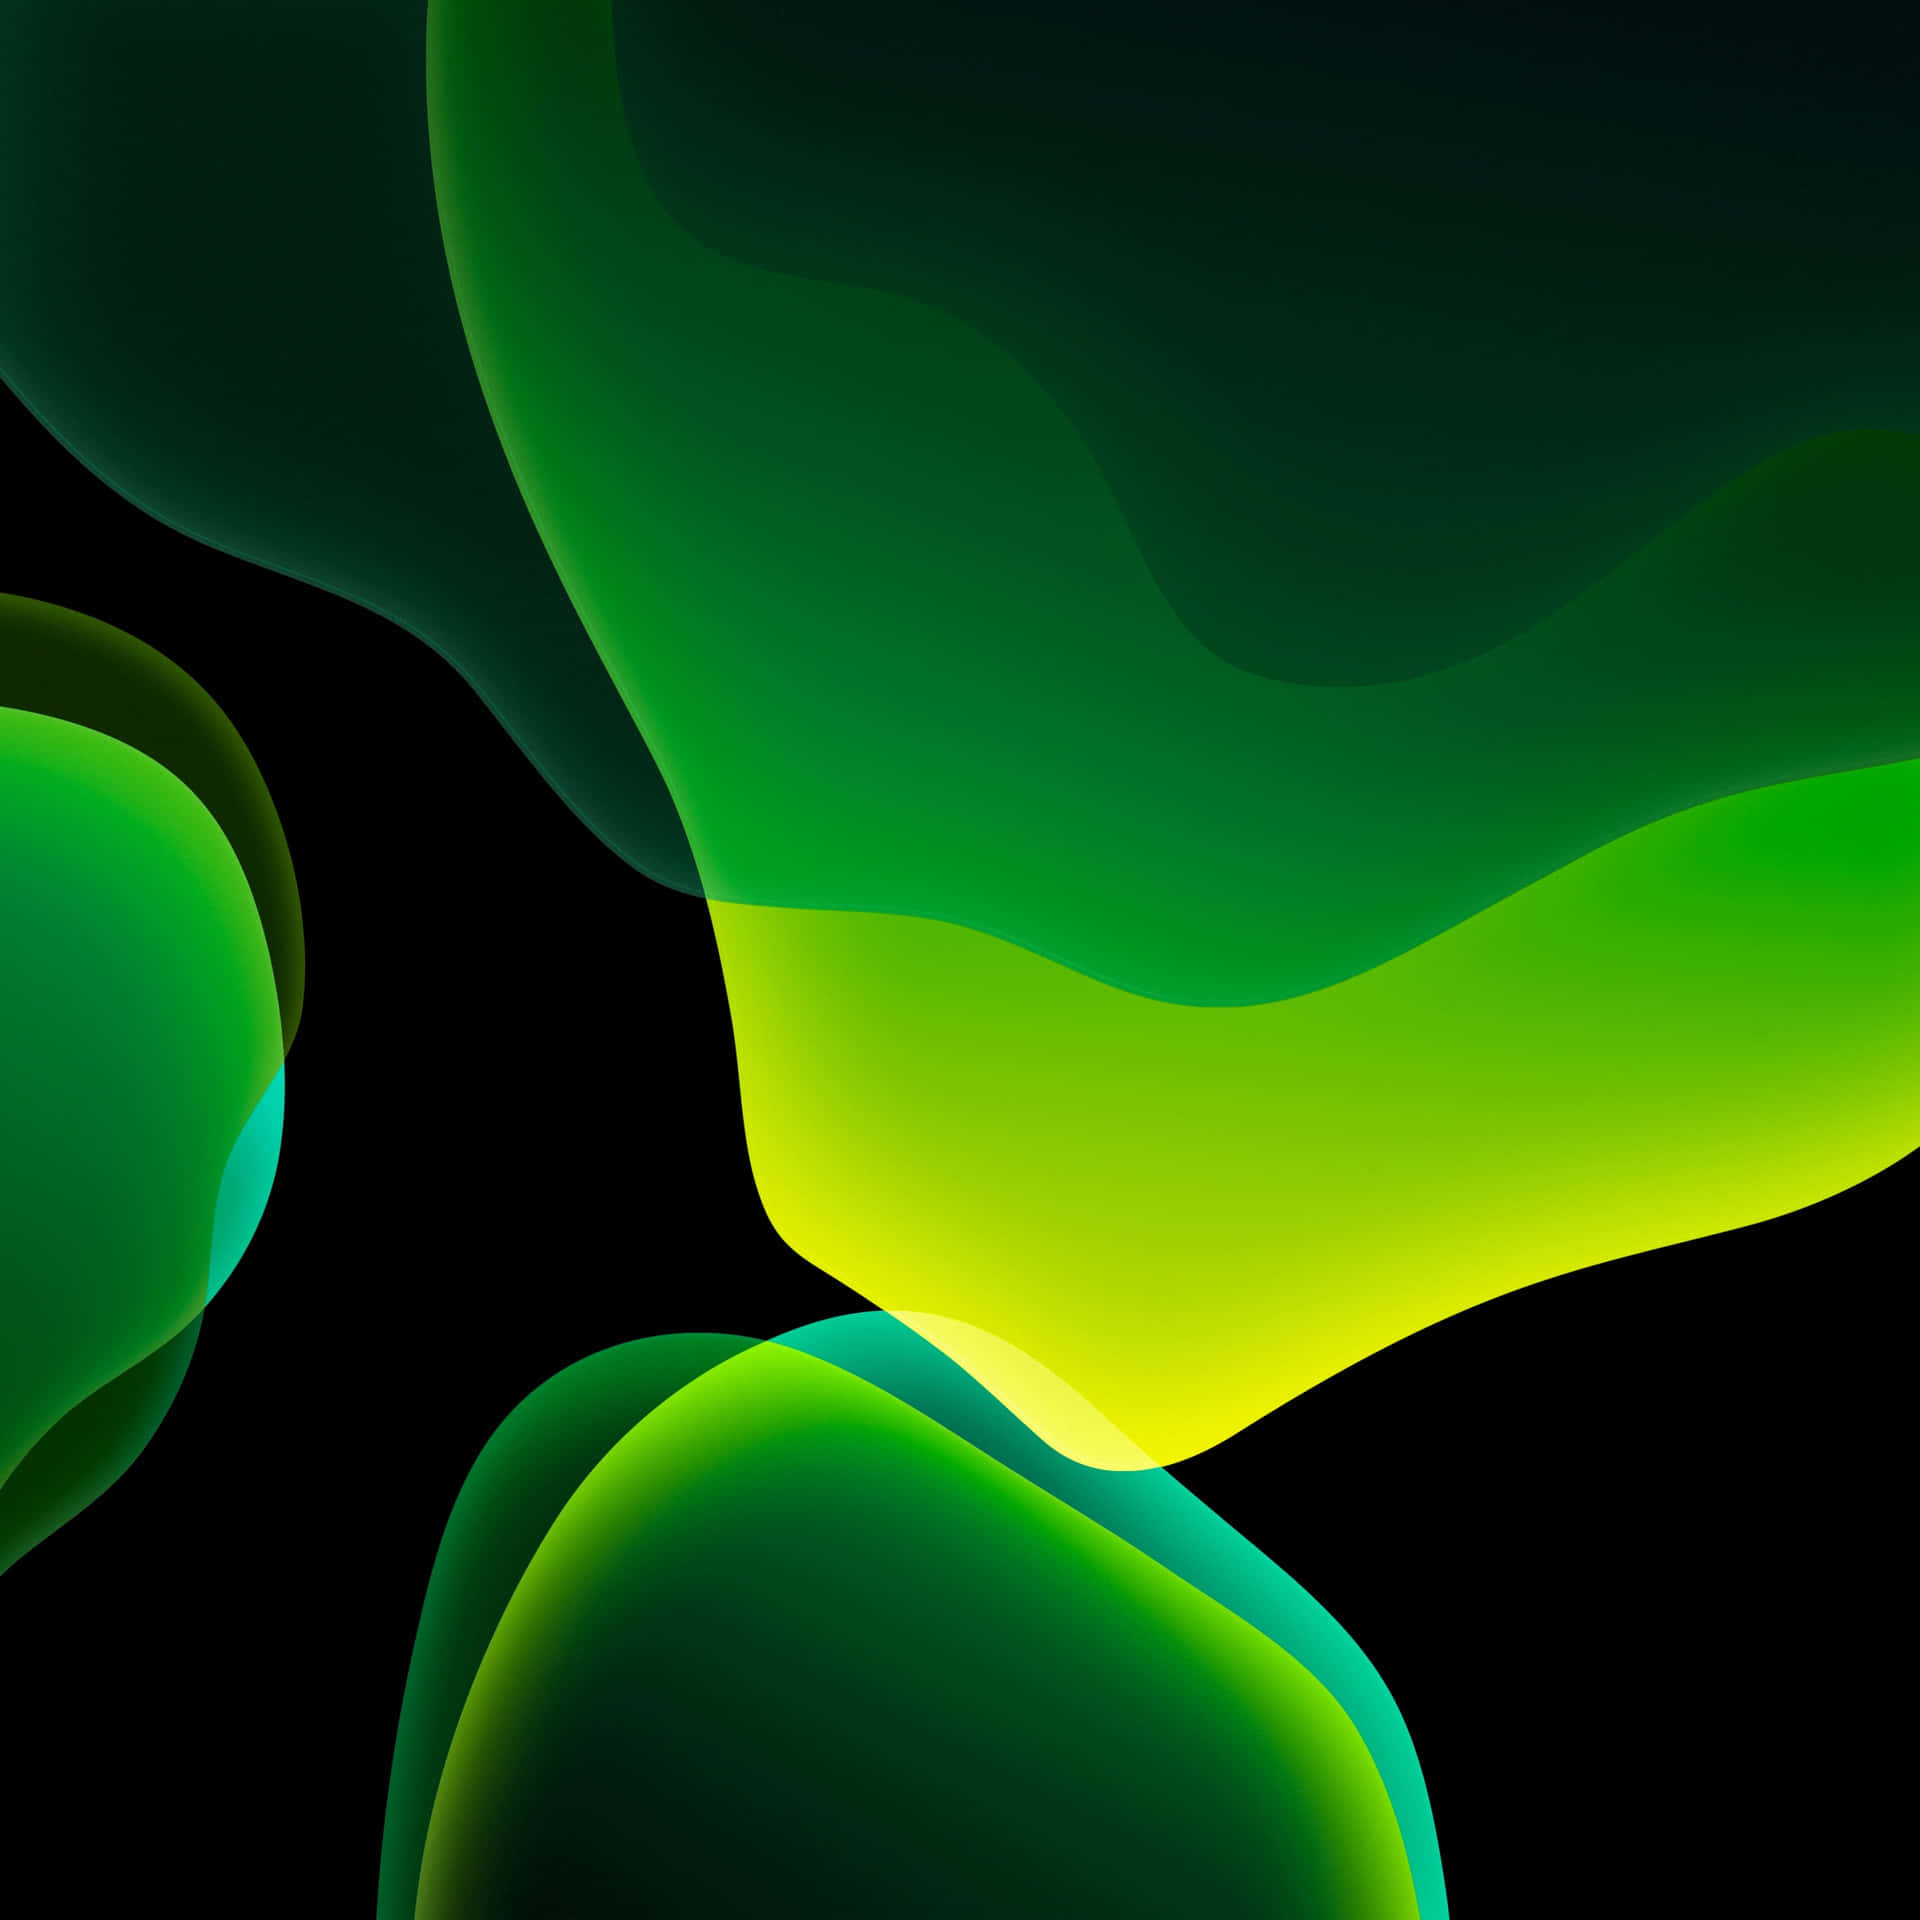 Abstract Black and Green Gradient Background